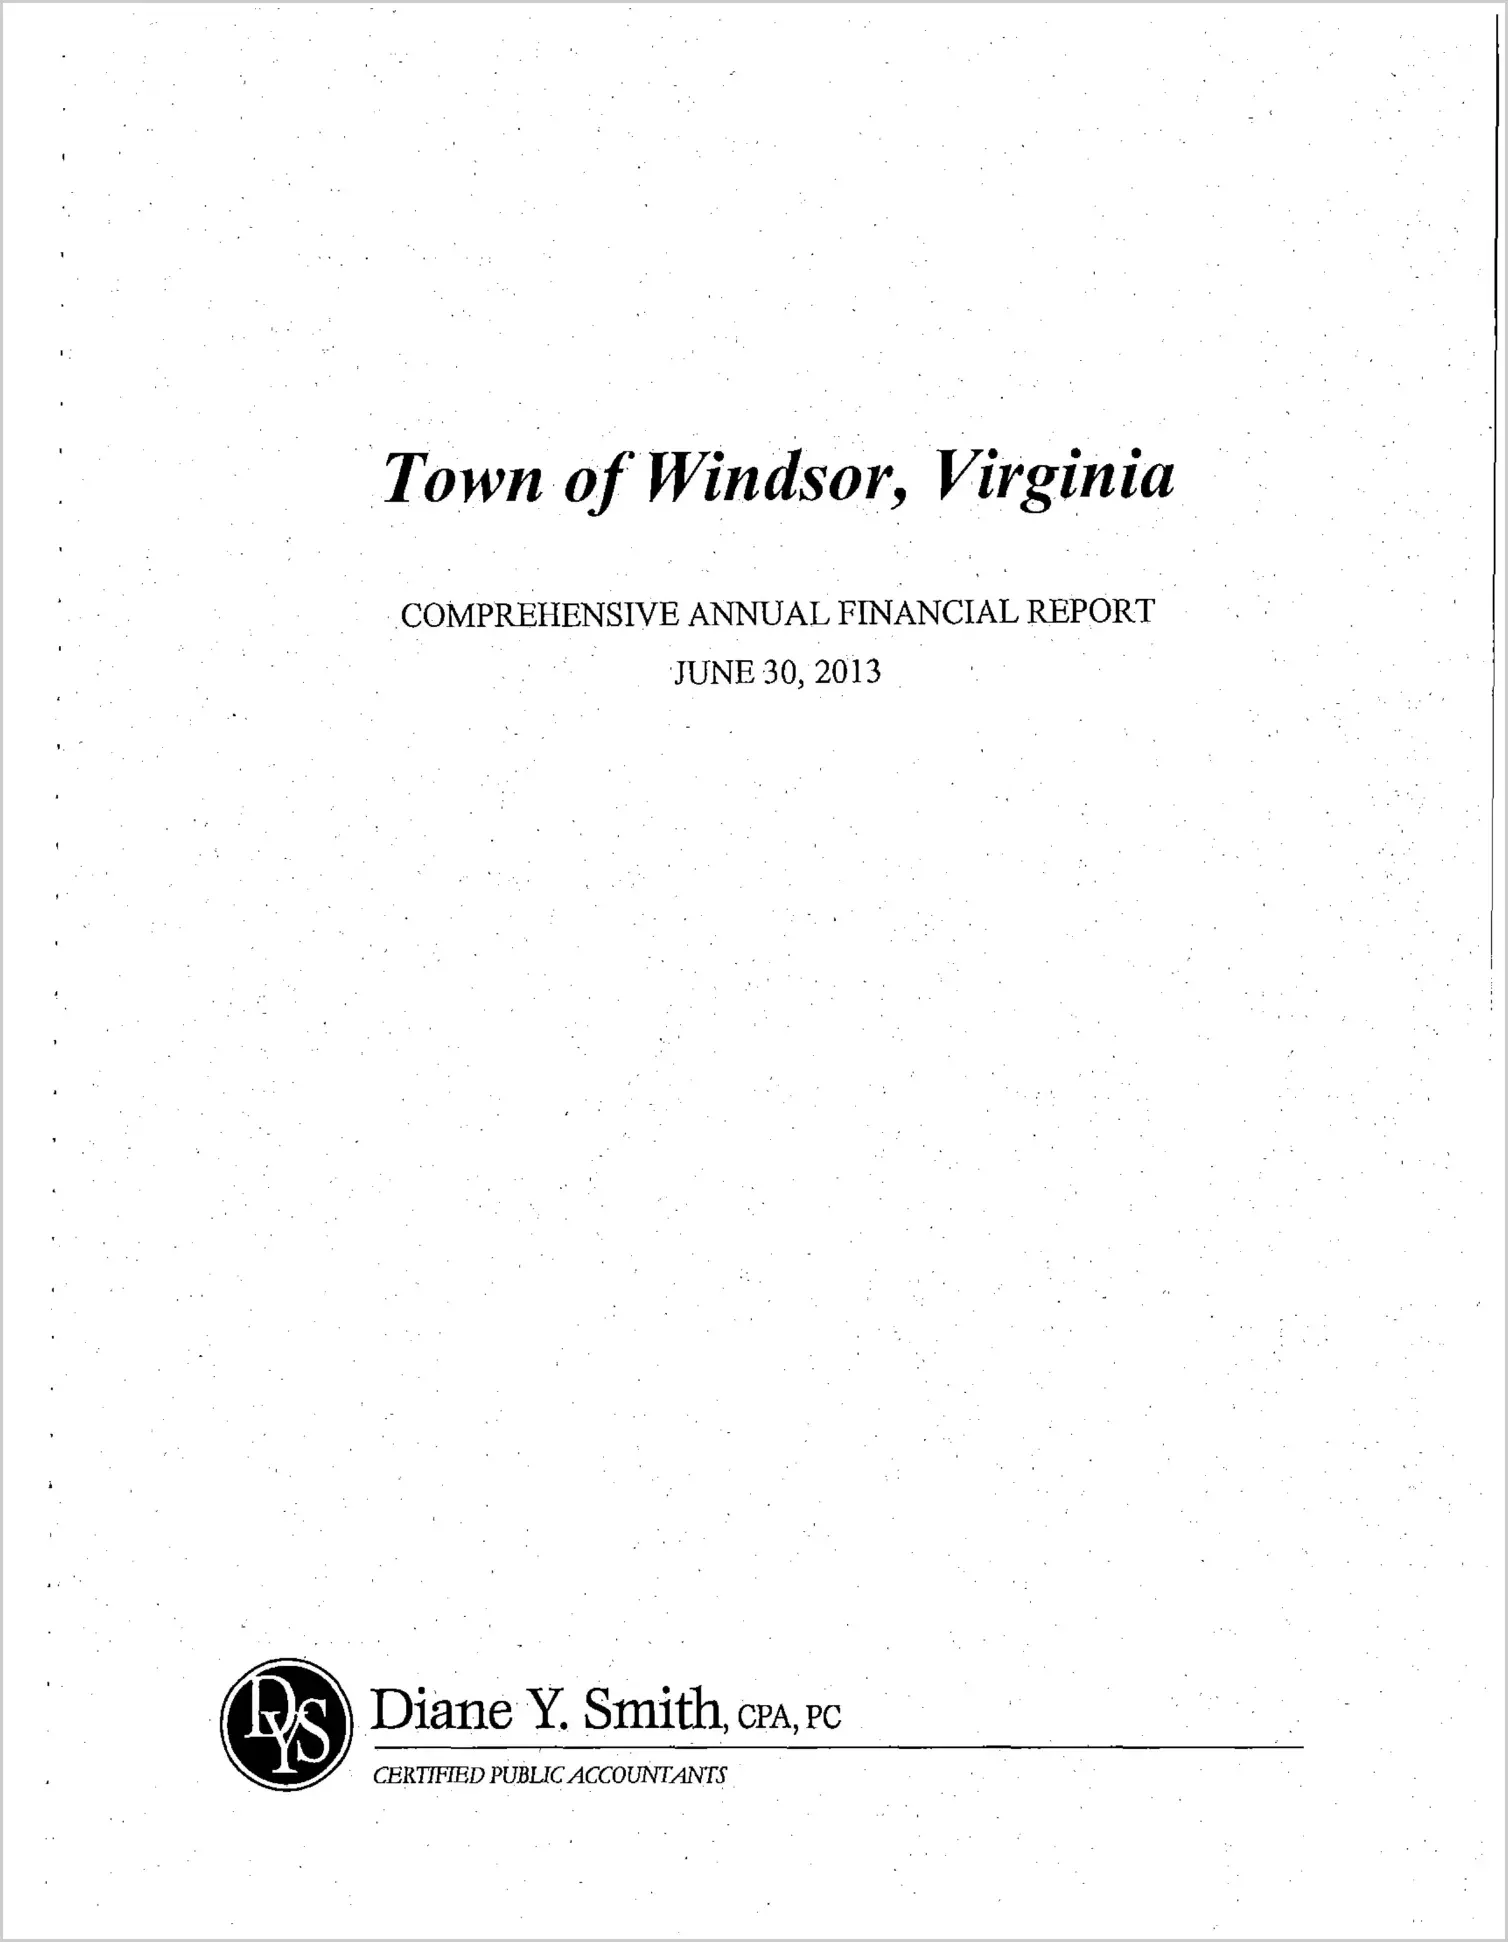 2013 Annual Financial Report for Town of Windsor